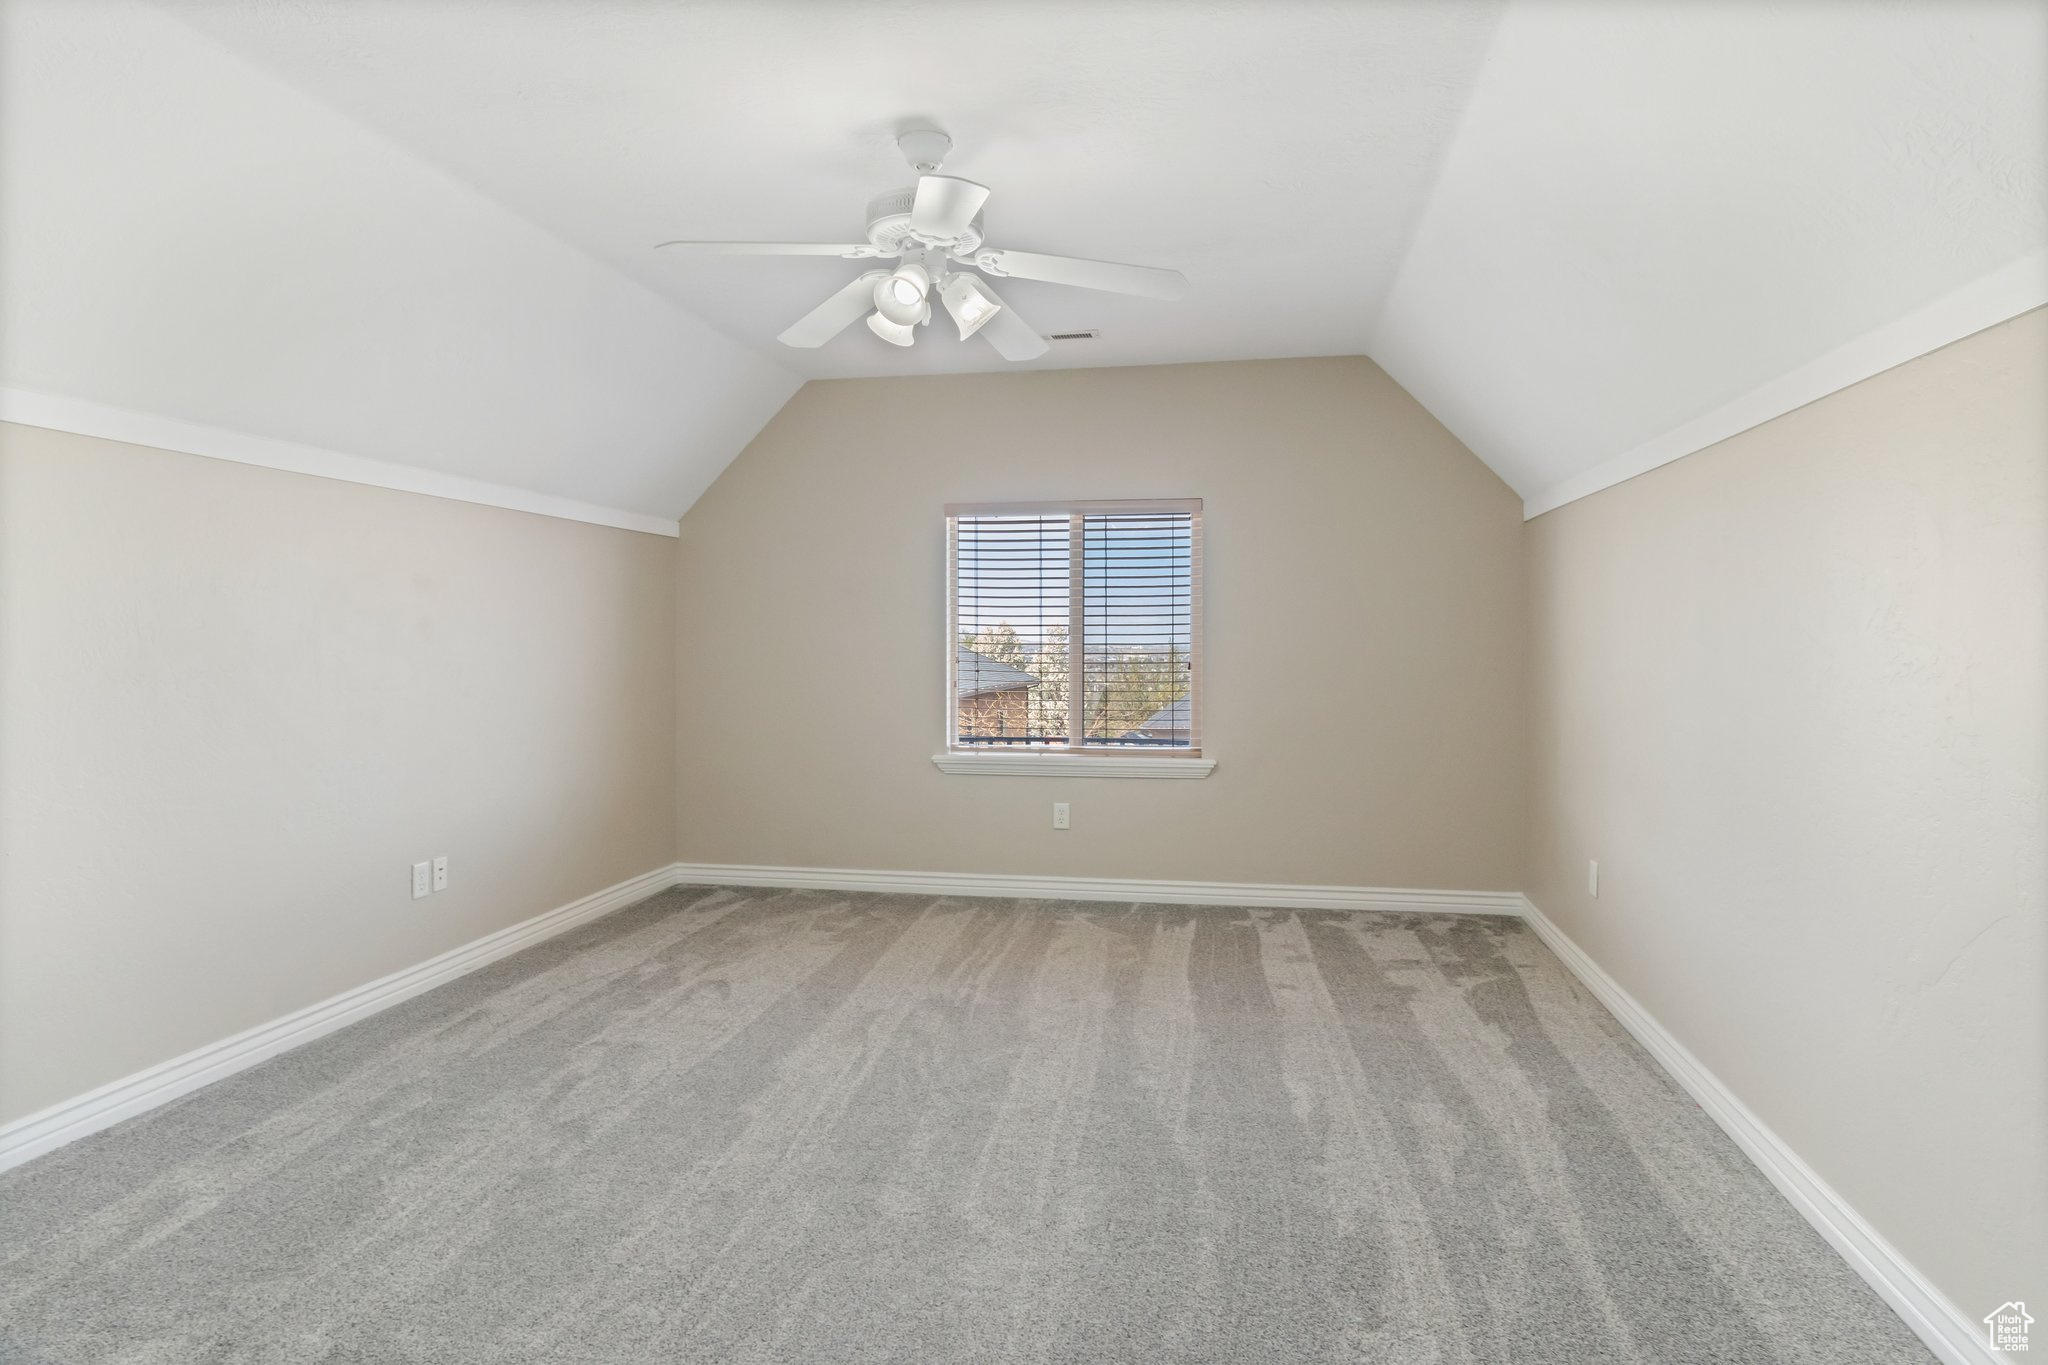 Additional living space featuring light colored carpet, ceiling fan, and lofted ceiling